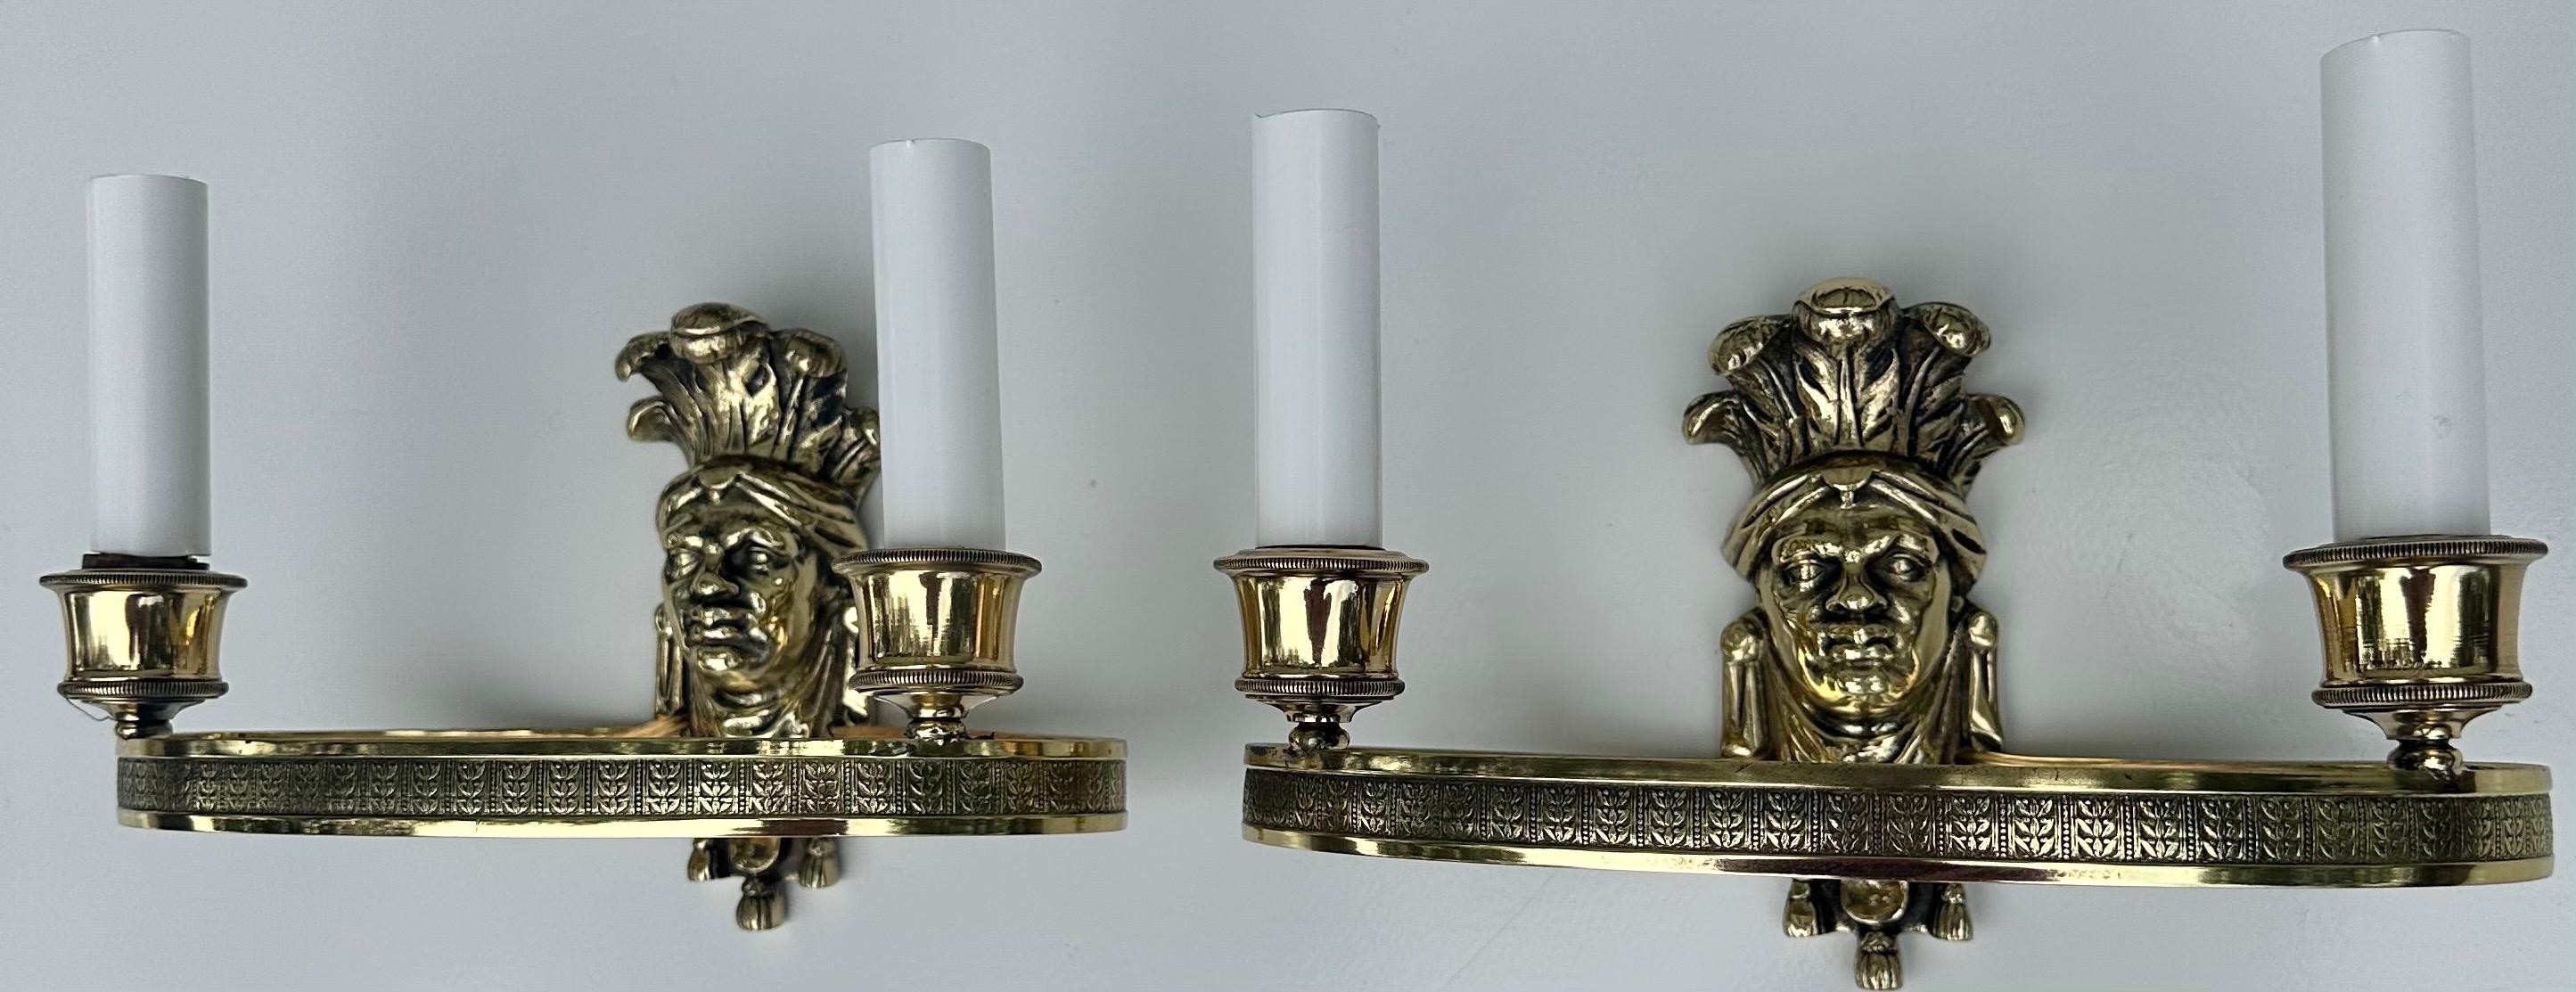 Pair of French Maison Bagues Bronze Sconces For Sale 2